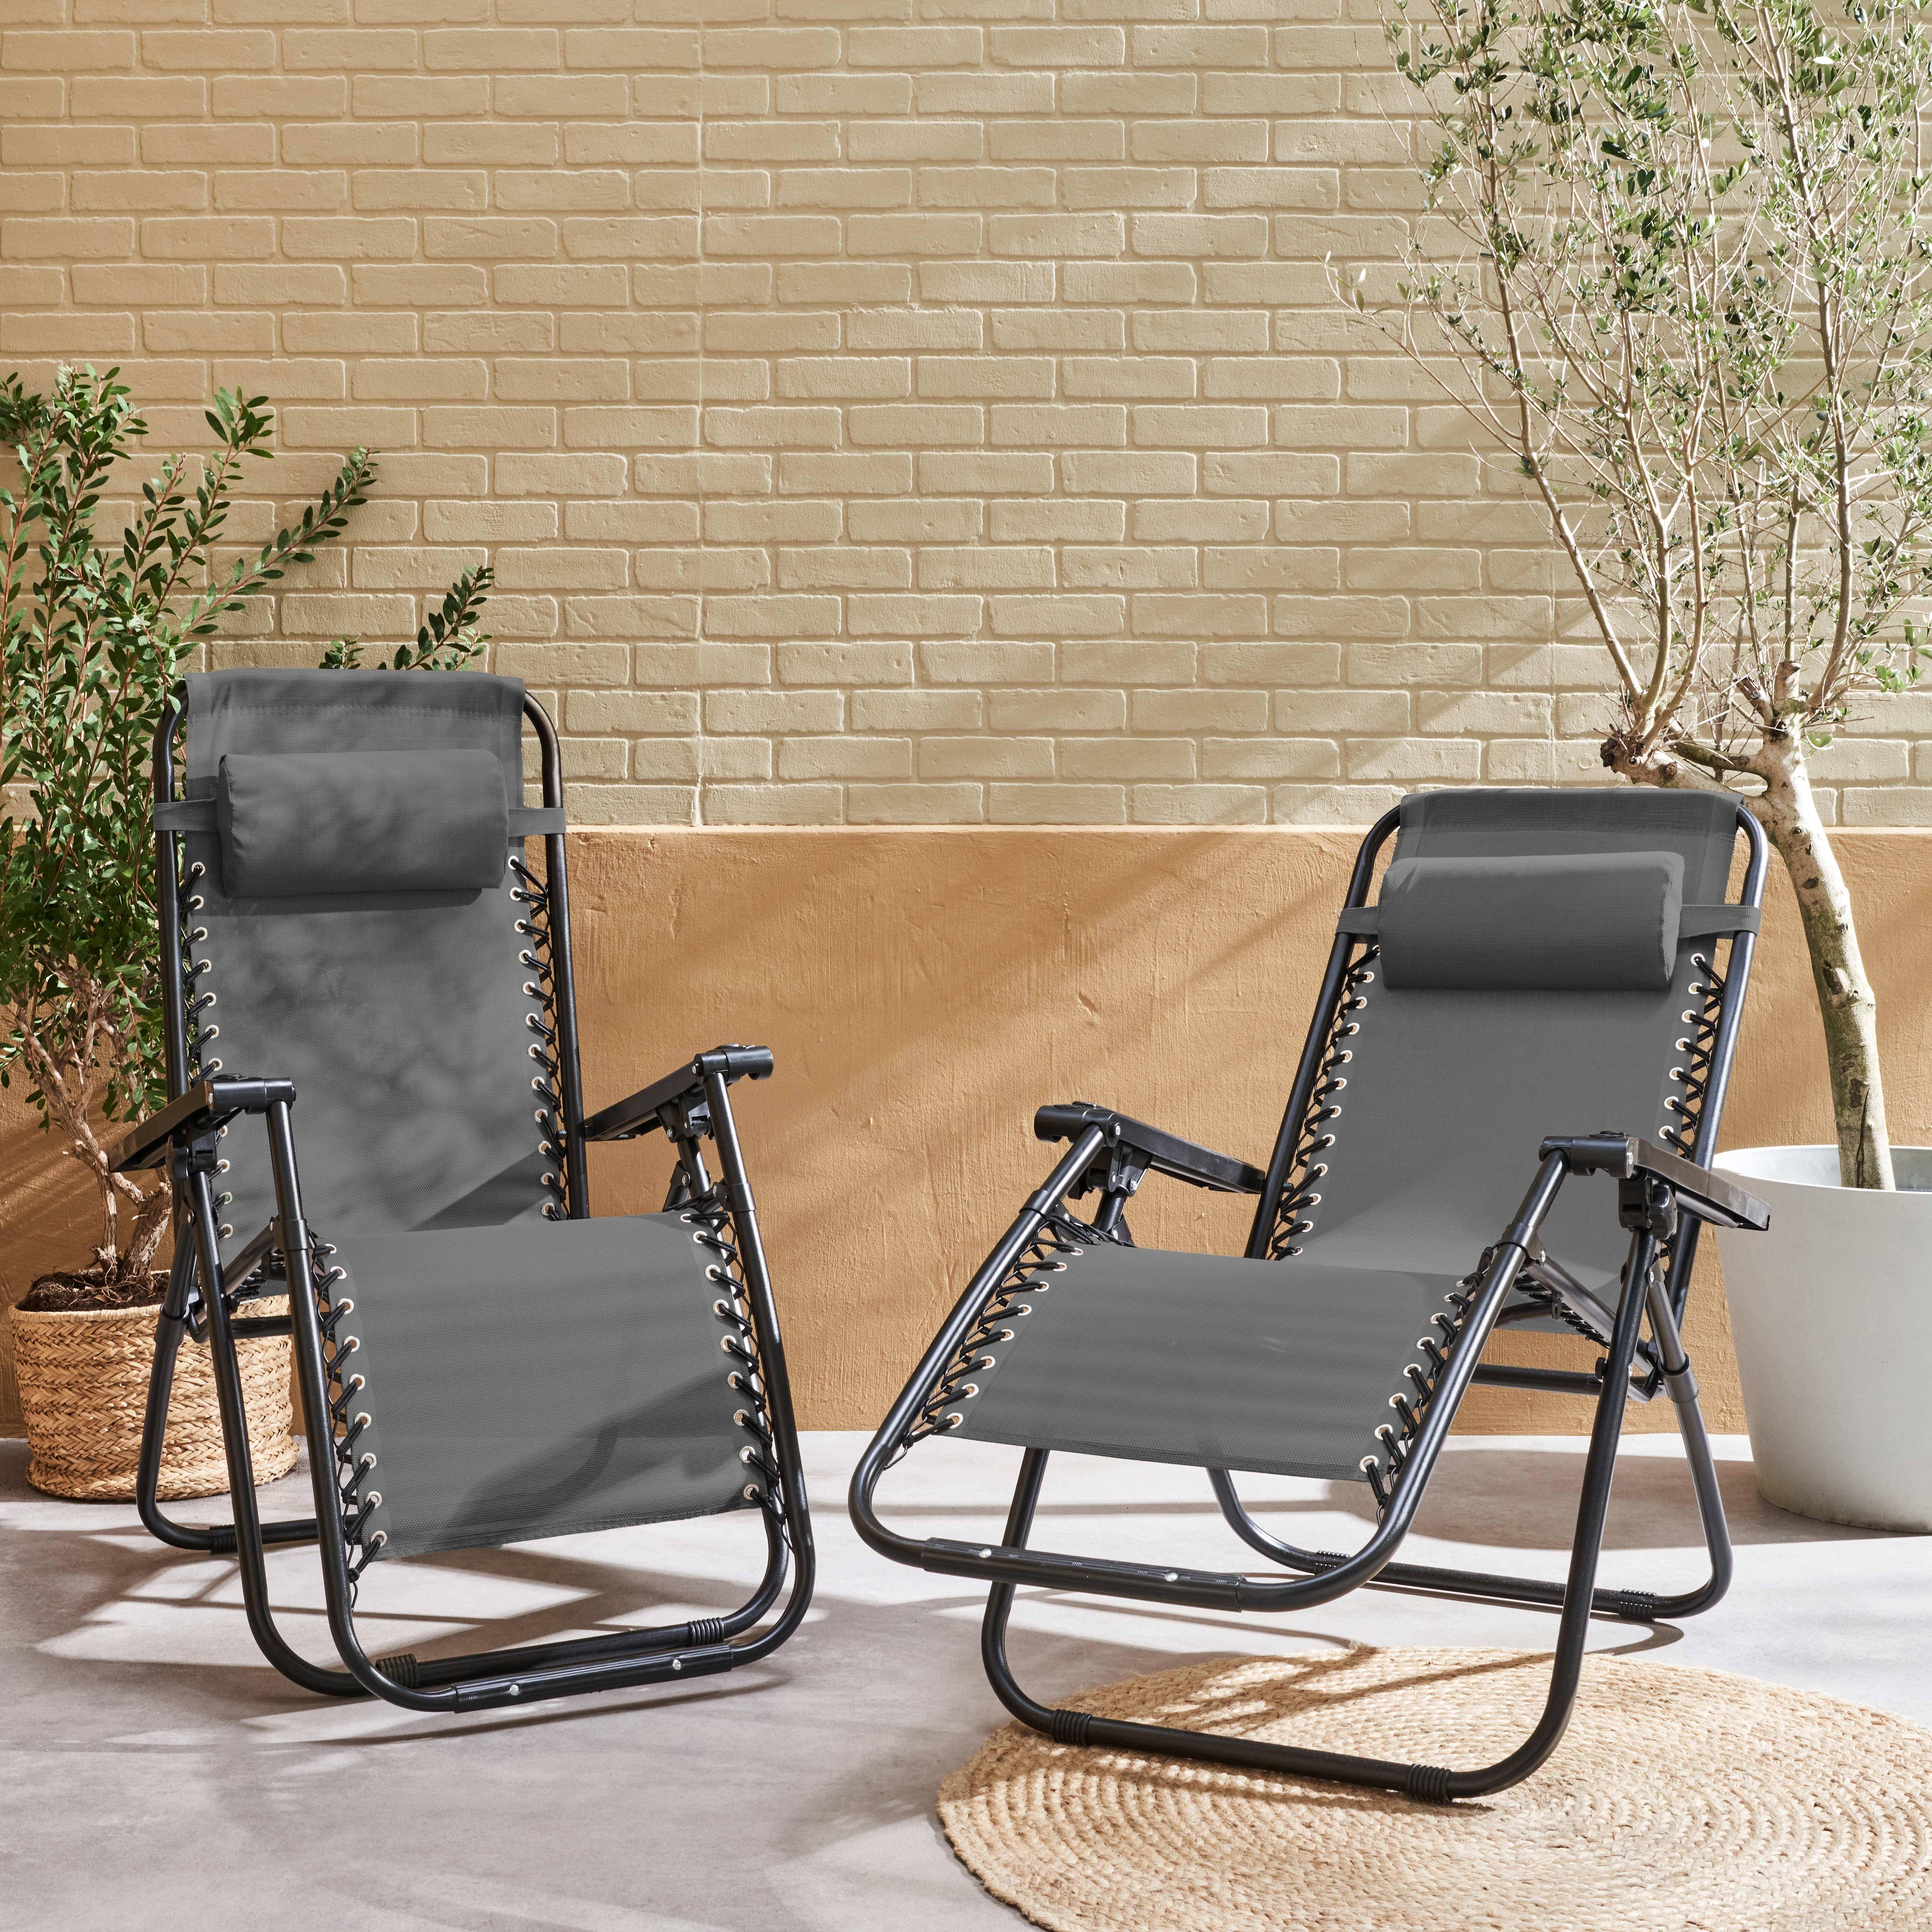 2 textilene reclining chairs - foldable, multi-position - Patrick - Anthracite Photo2